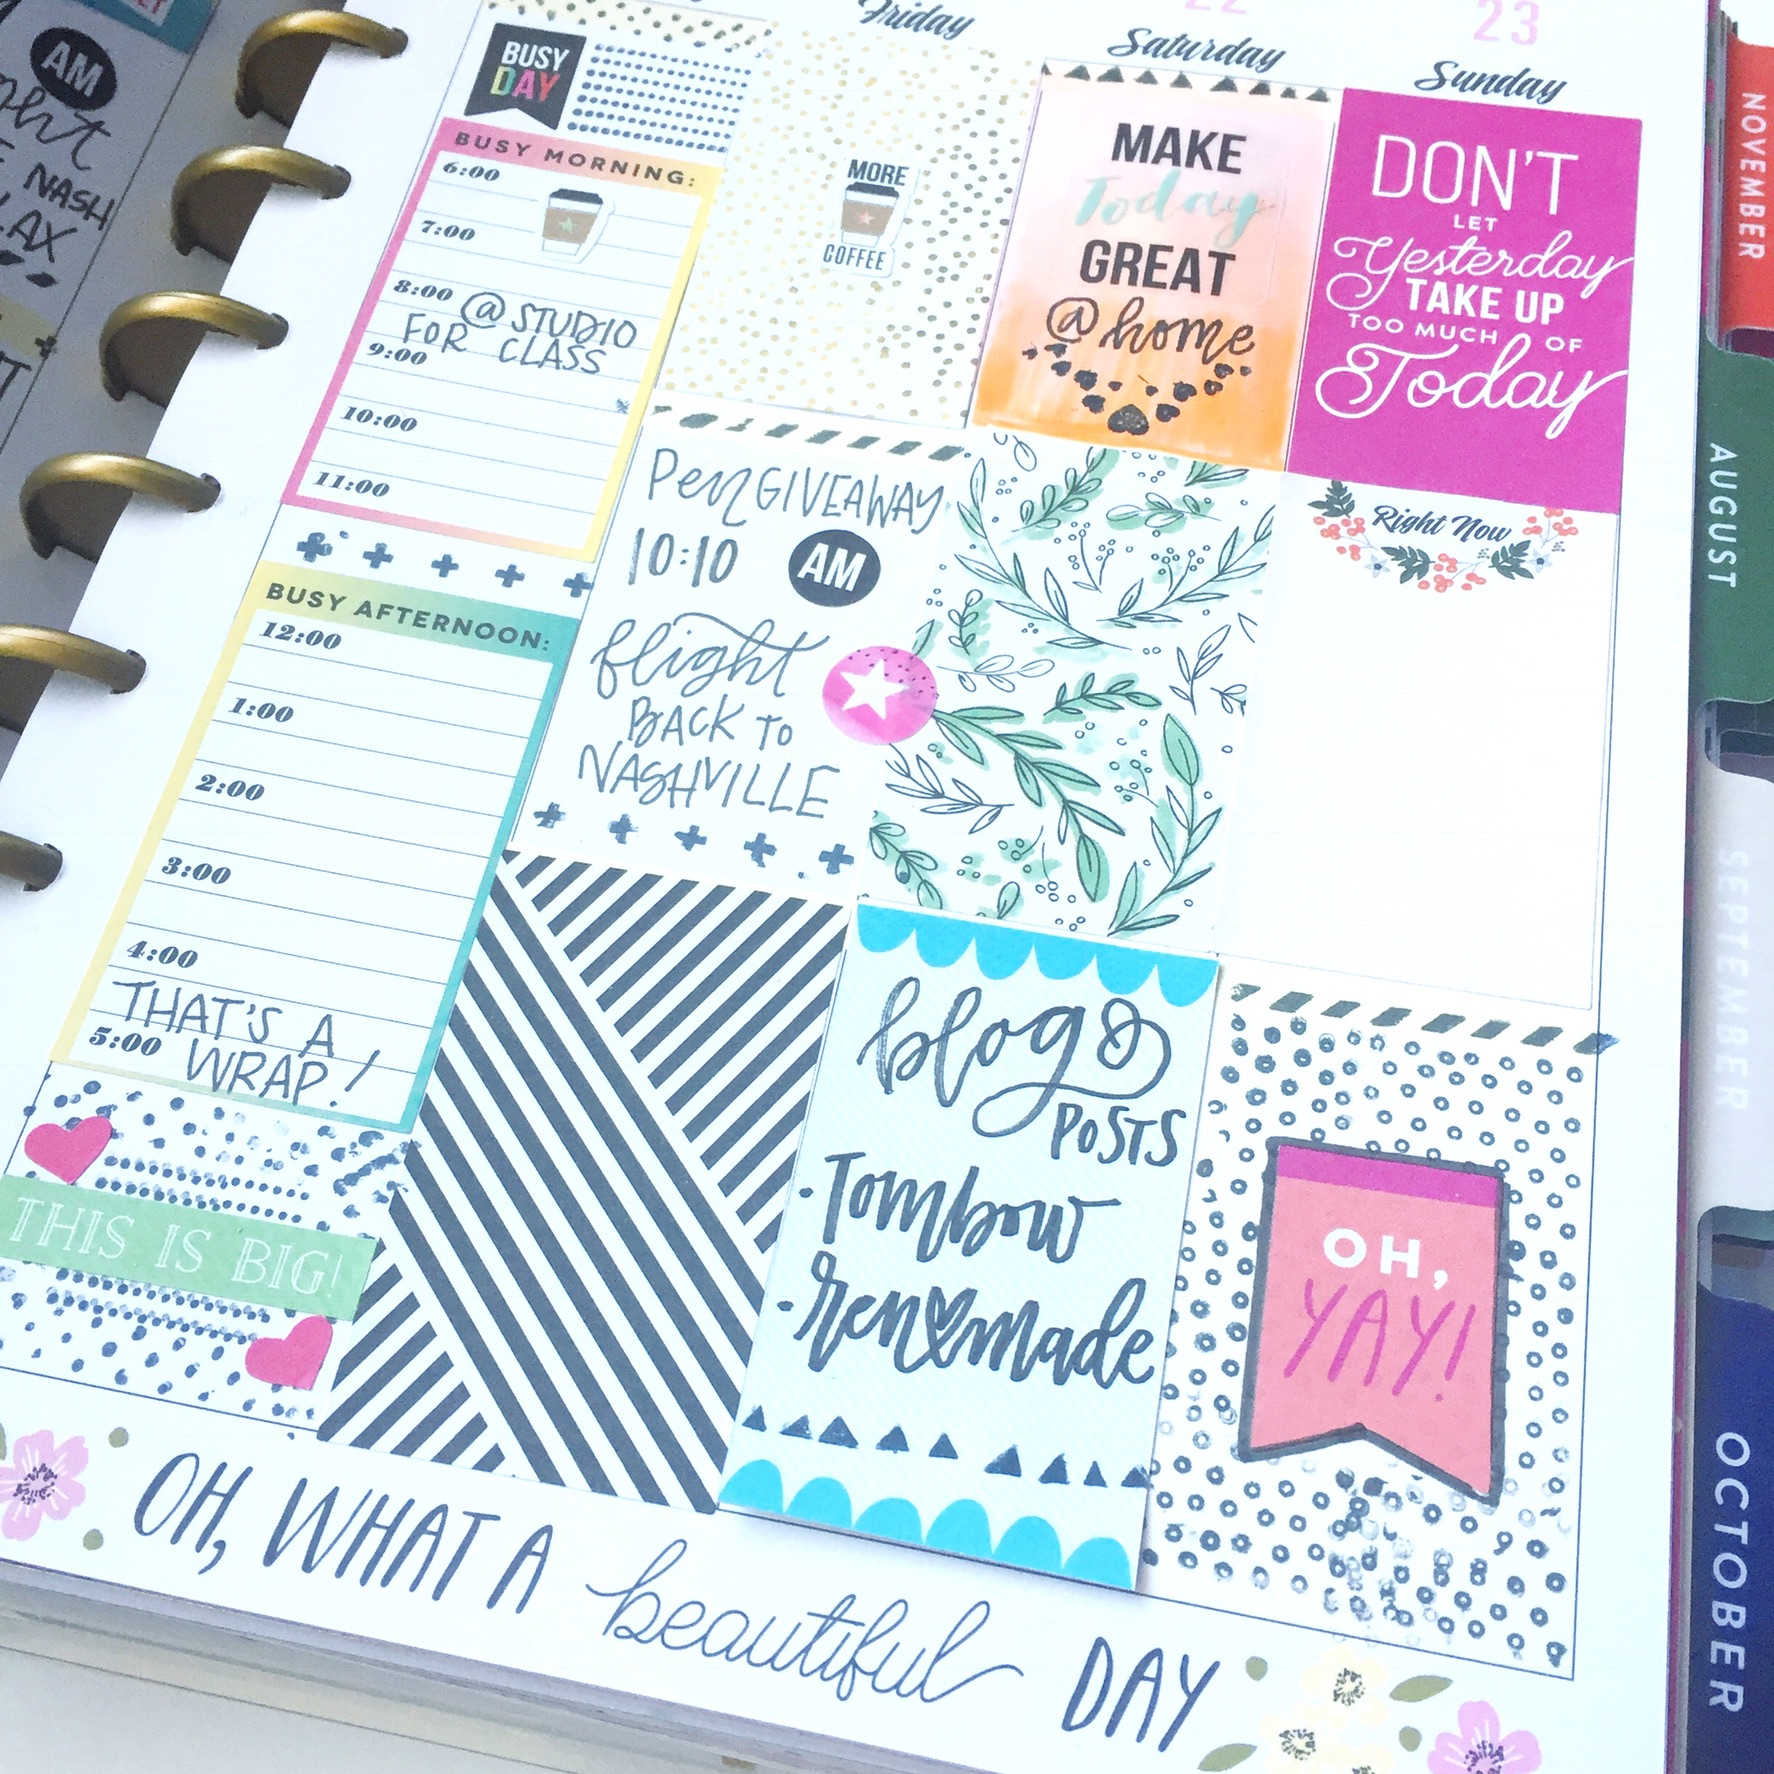 Learn some techniques for how to add color and patterns to your planner with @waffleflower and @tombowusa products. Lauren of @renmadecalligraphy (renmadecalligraphy.com) loves to give lettering and crafting tips!